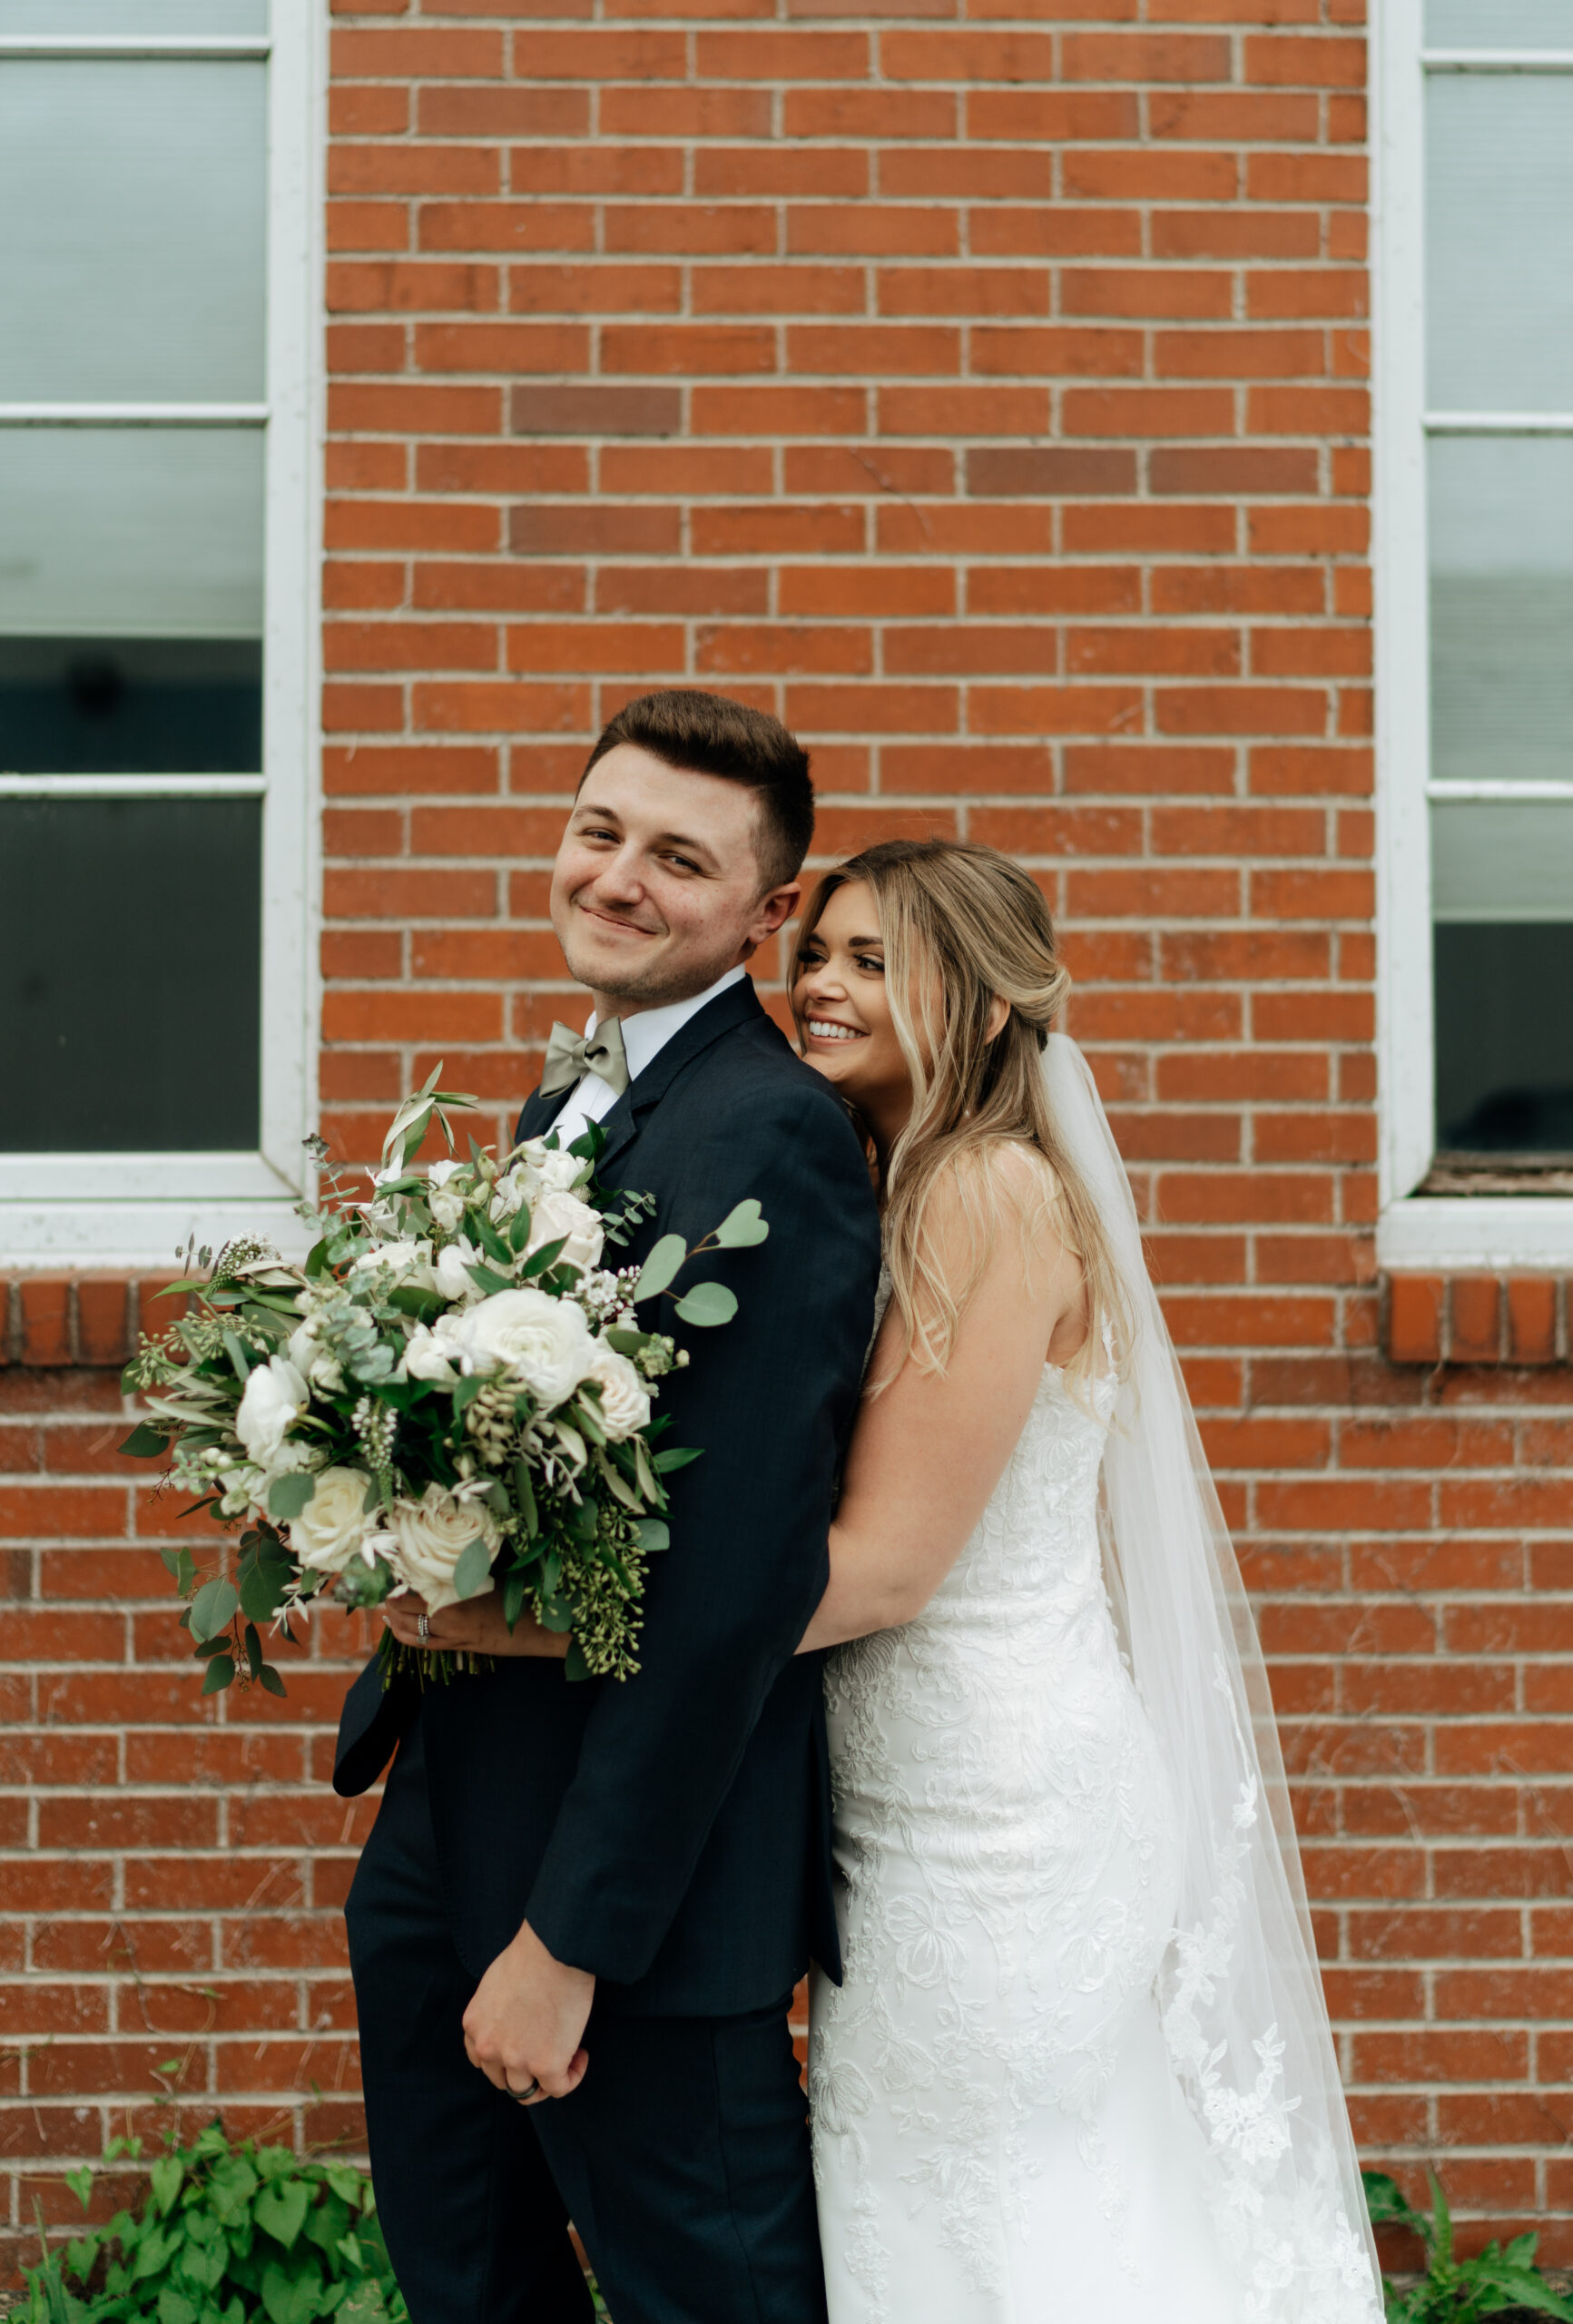 This is a picture of the bride and groom on their wedding day outside of the Harmac in Cedar Rapids, IA